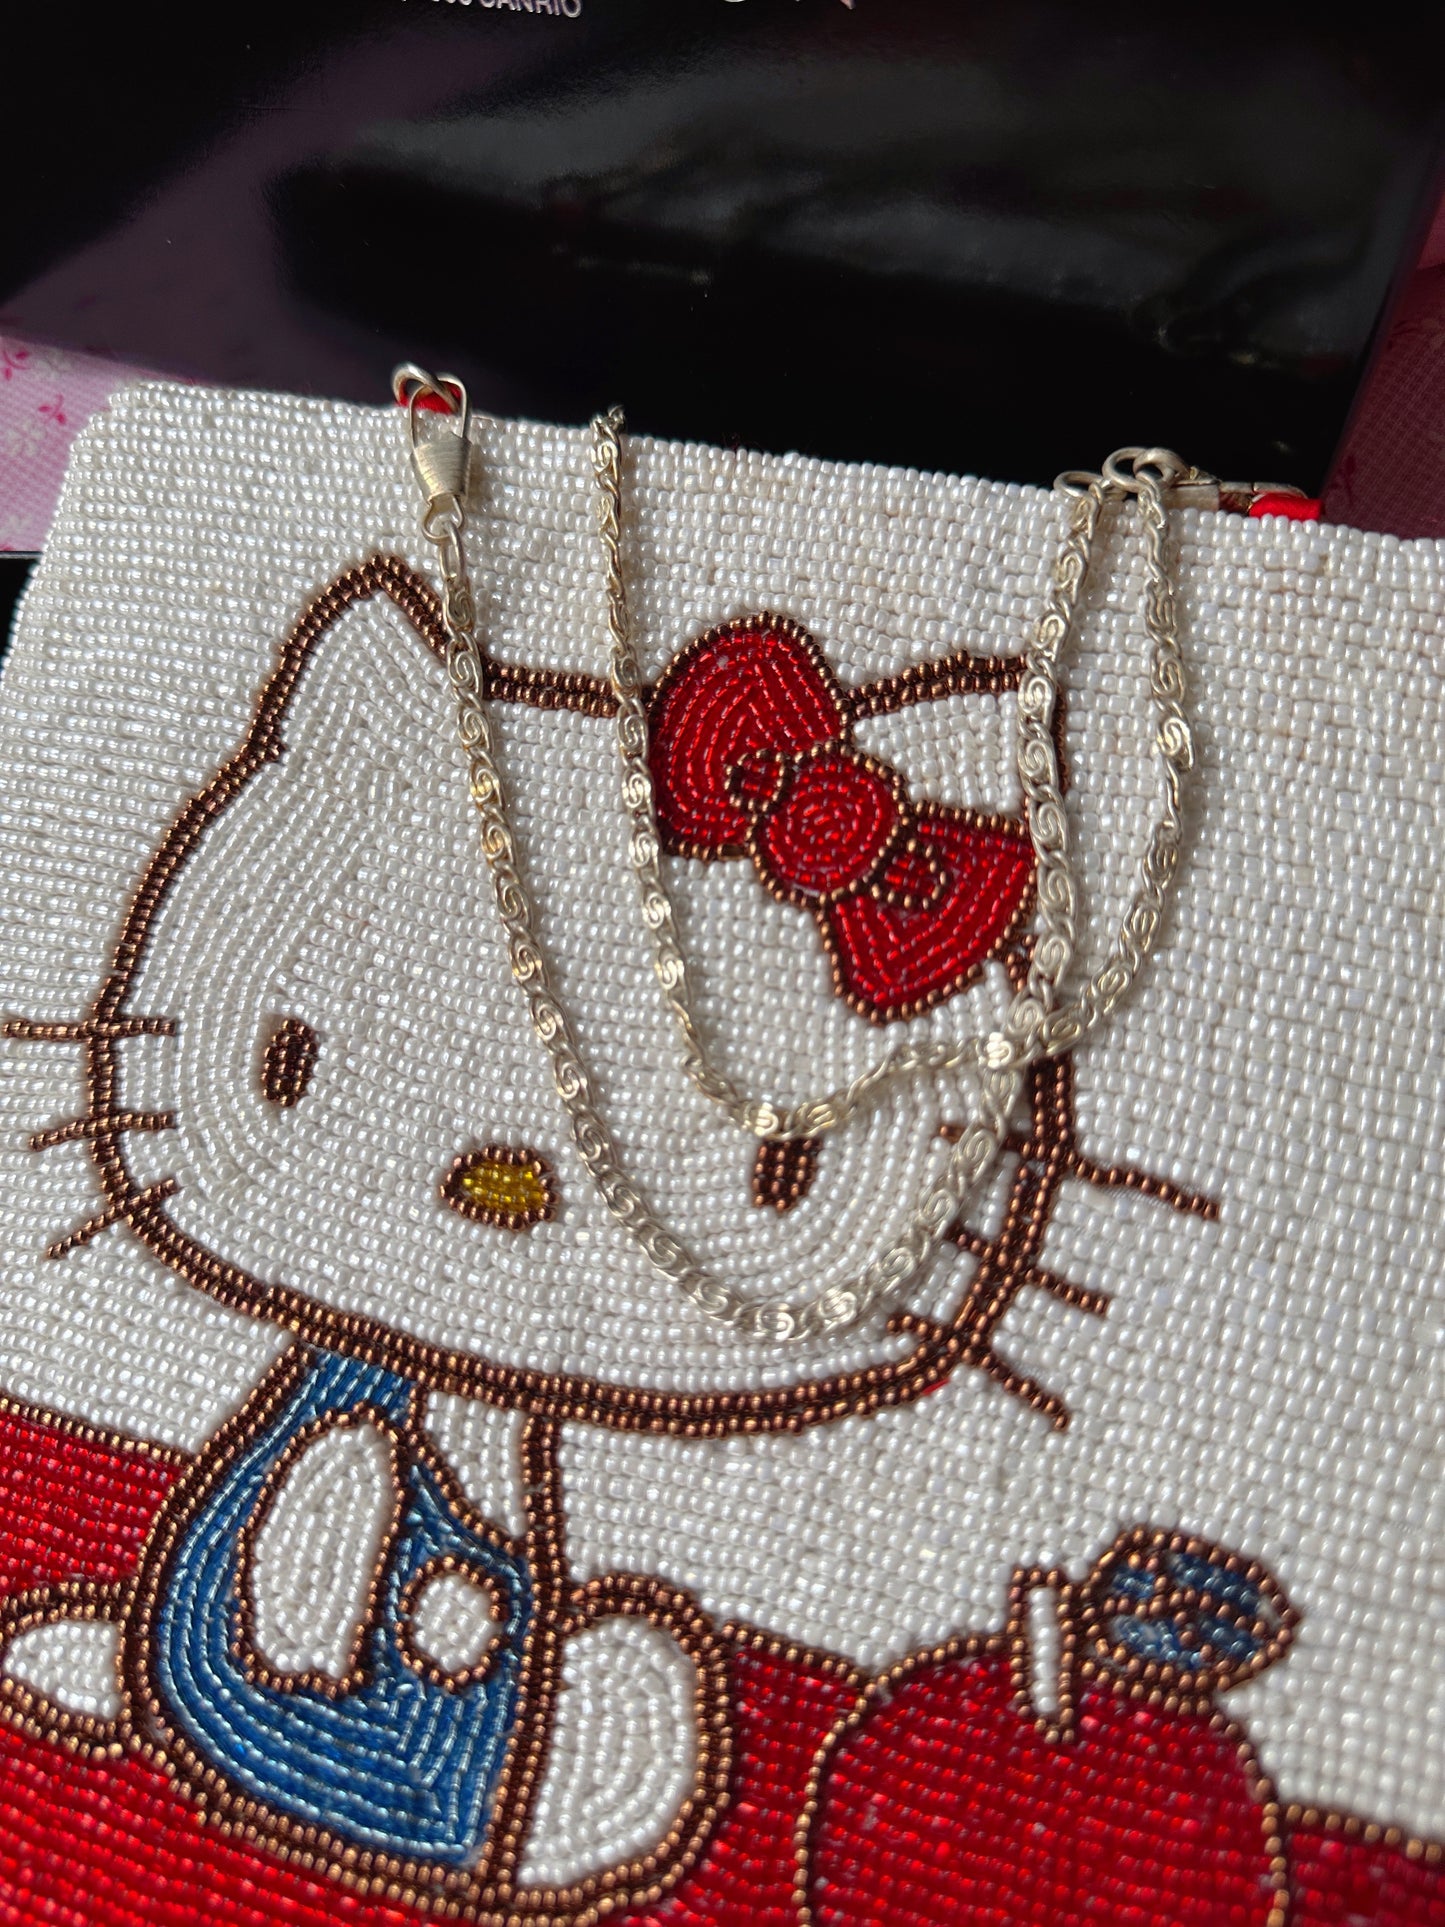 Beaded Hello Kitty Pouch Bag with Box